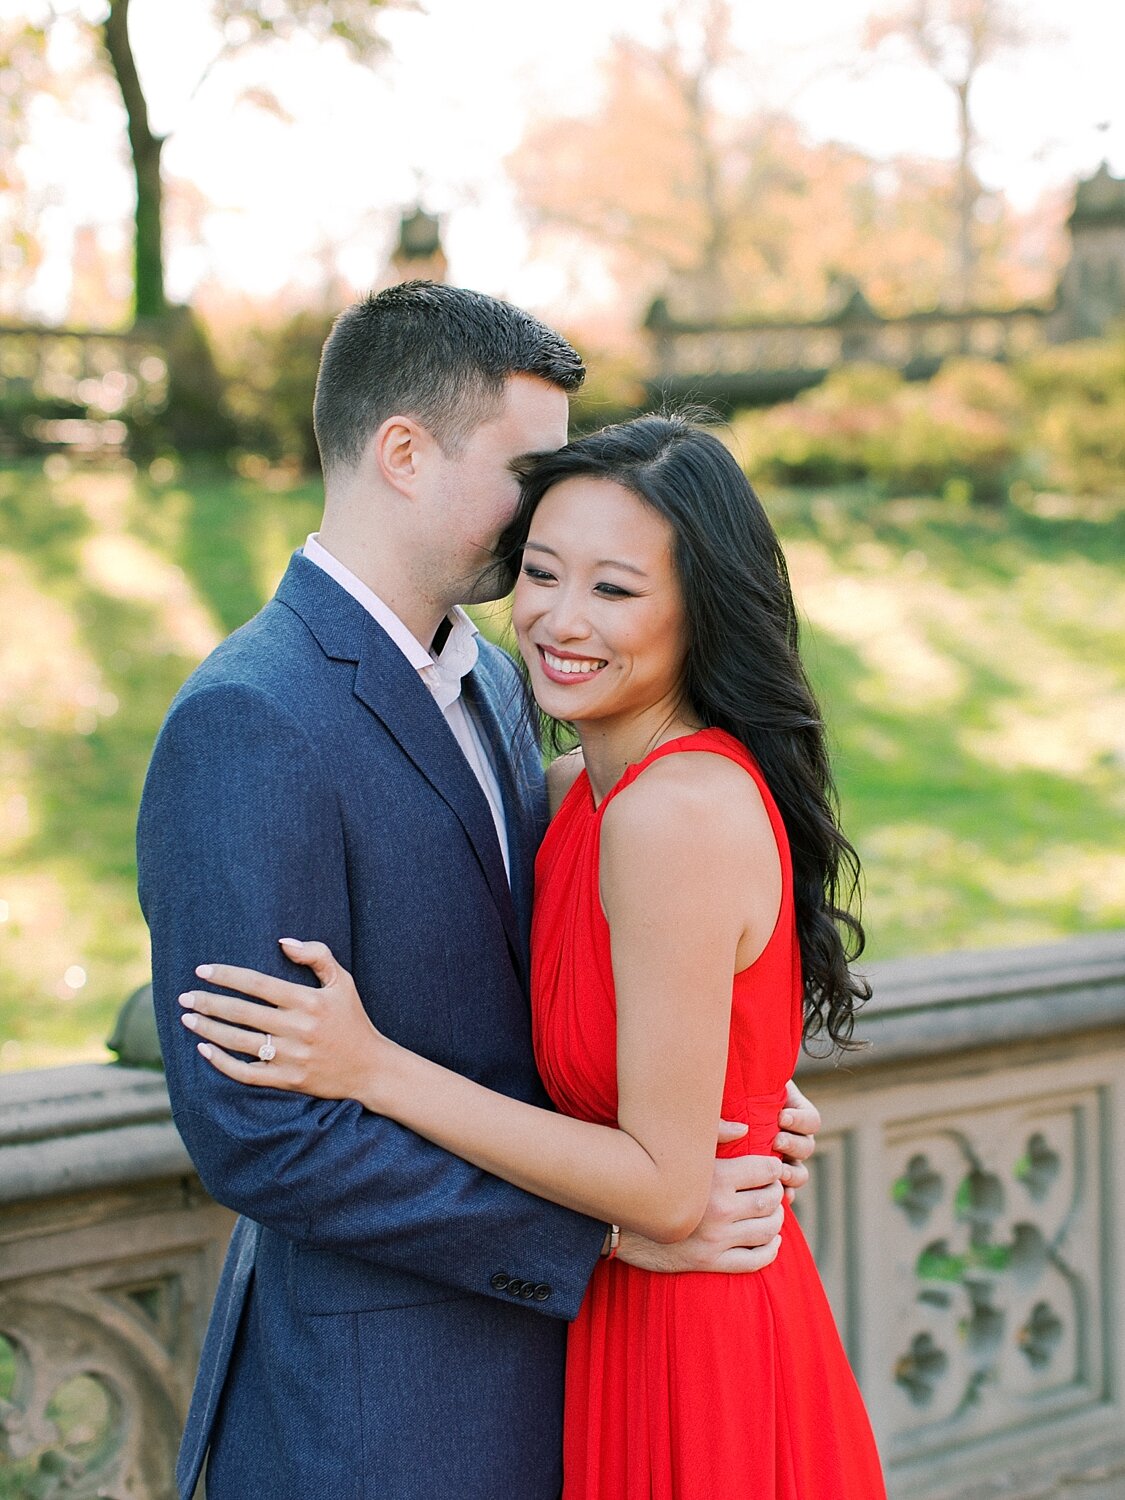 chic engagement portraits in NYC by Asher Gardner Photography